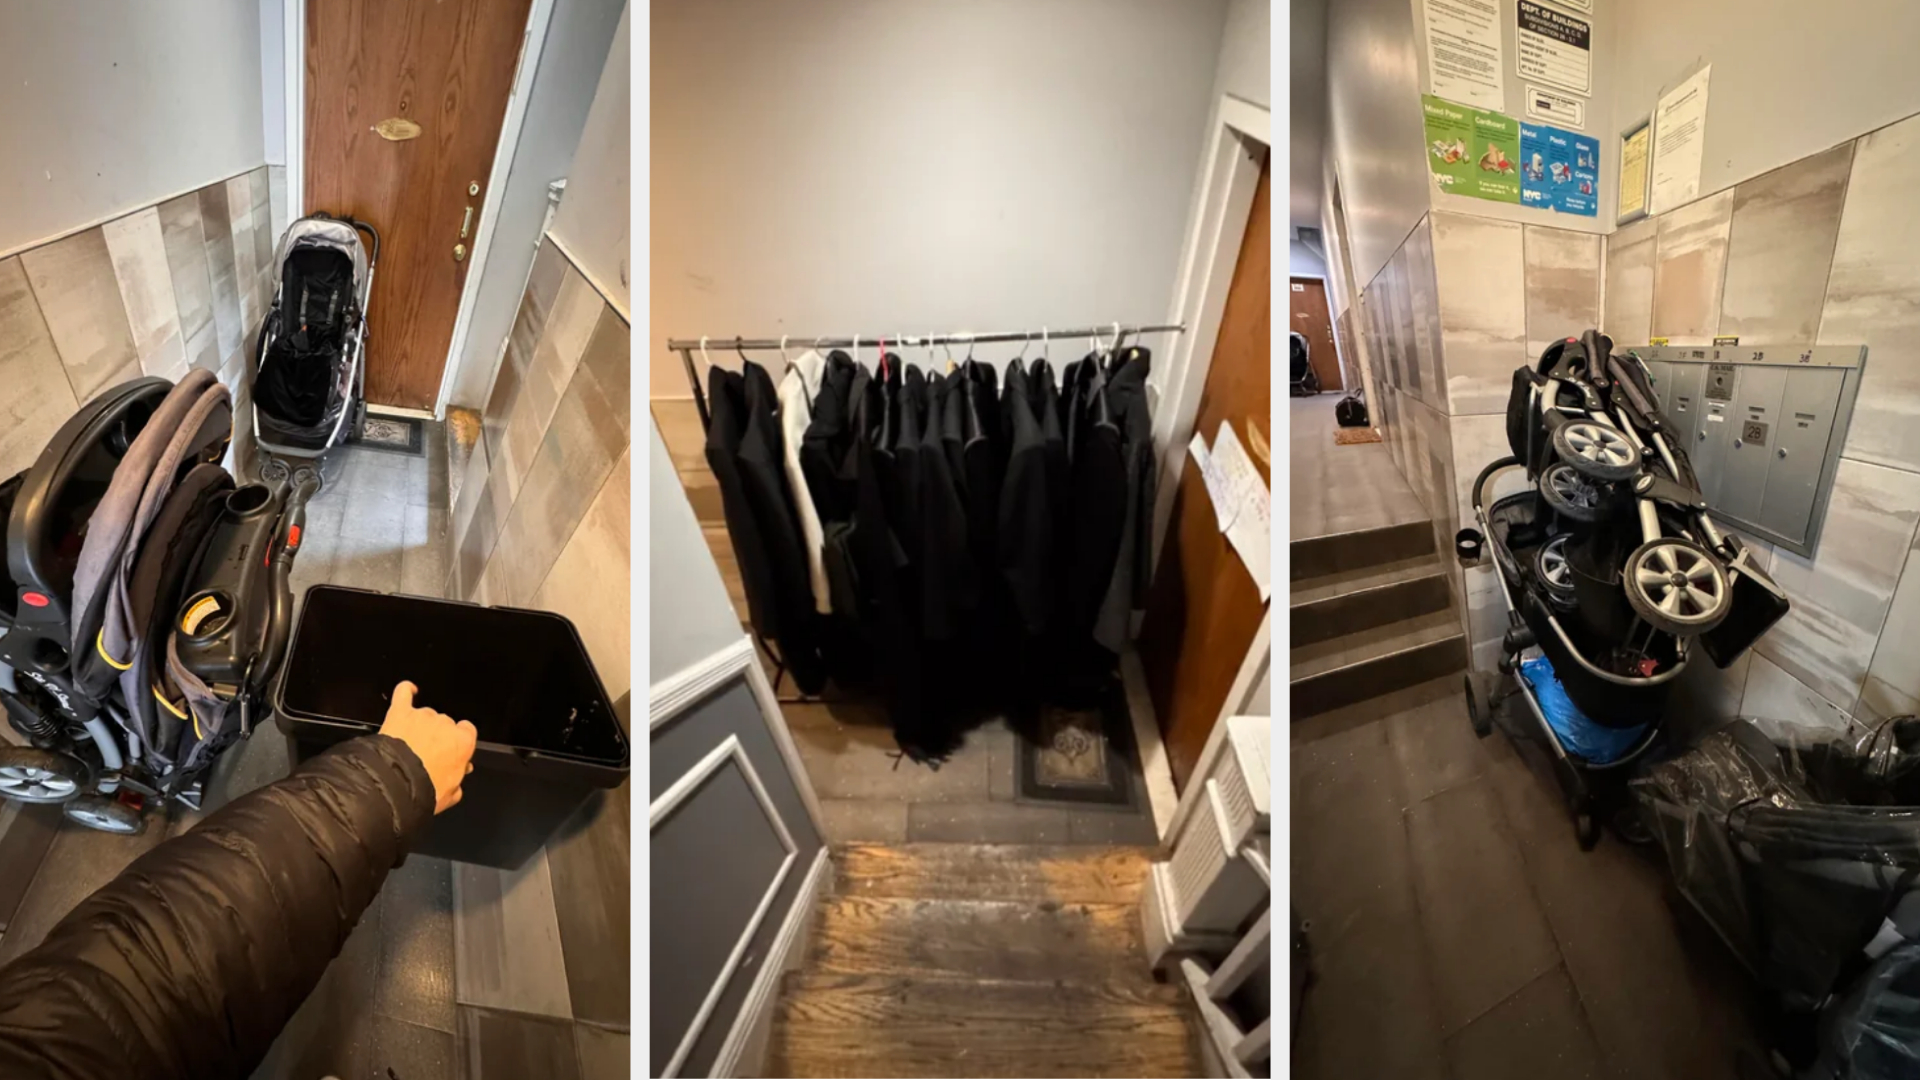 Three images showing a cluttered entryway before, an empty hallway, and an organized entryway with coats and shoes after cleaning